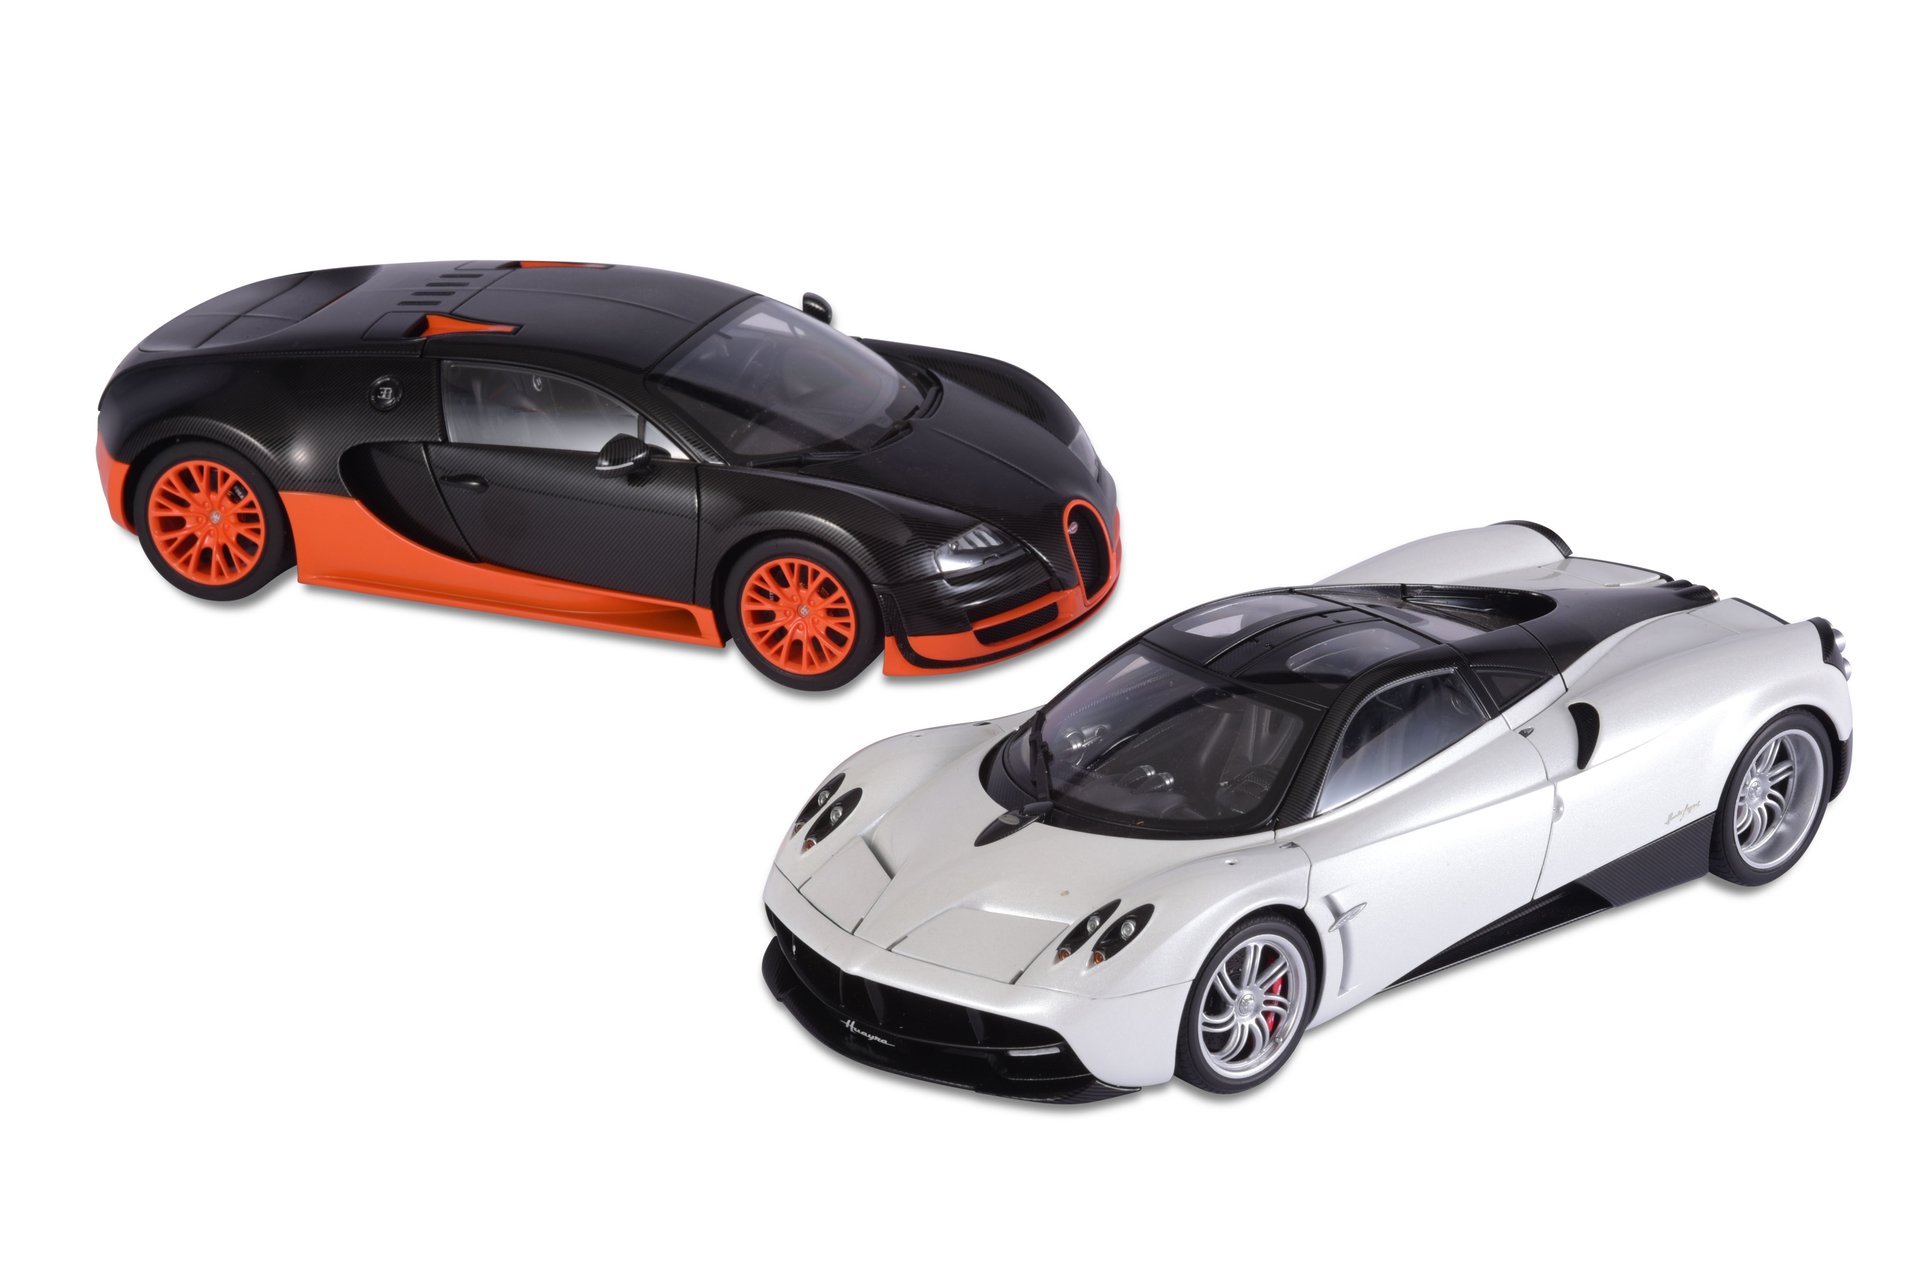 For Sale Pair of Super Cars including Bugatti Veyron Super Sport and Pagani Huayra